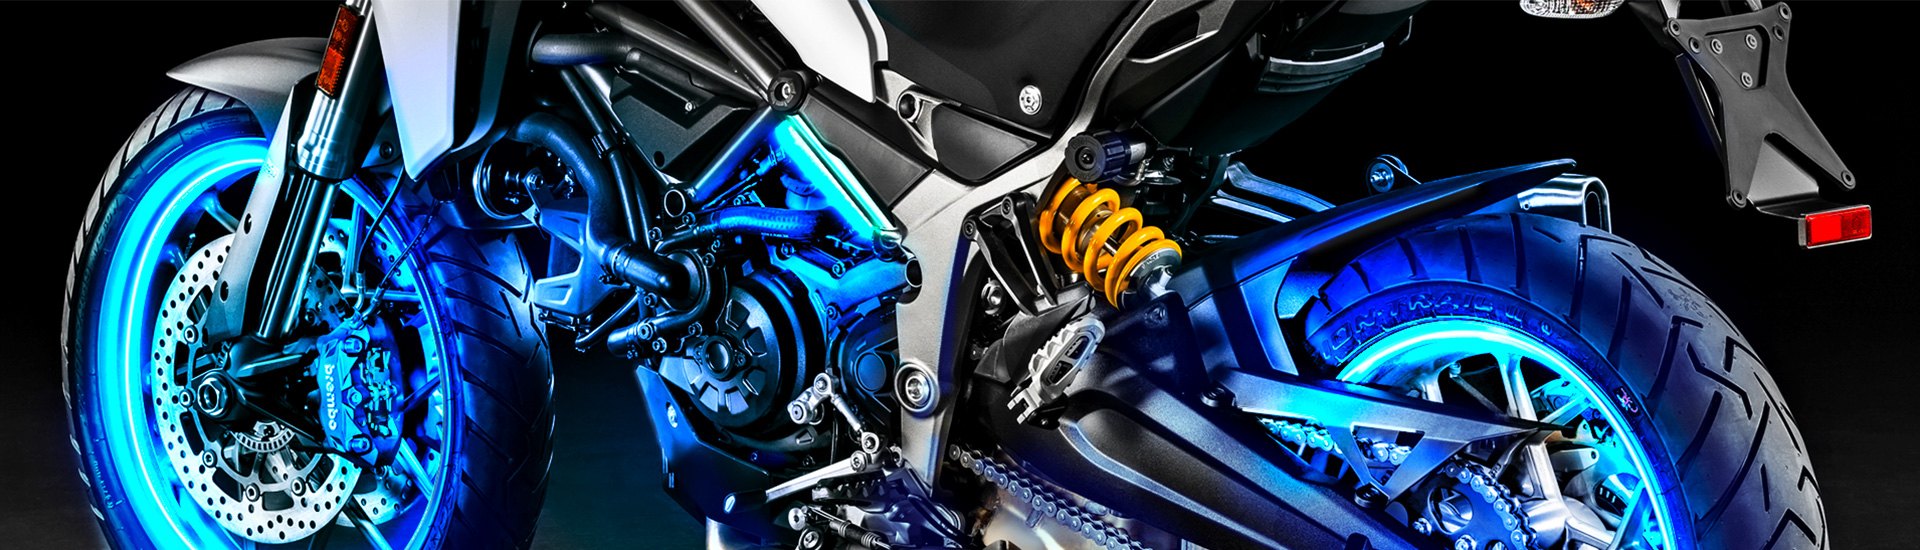 Universal Motorcycle Accent Lights